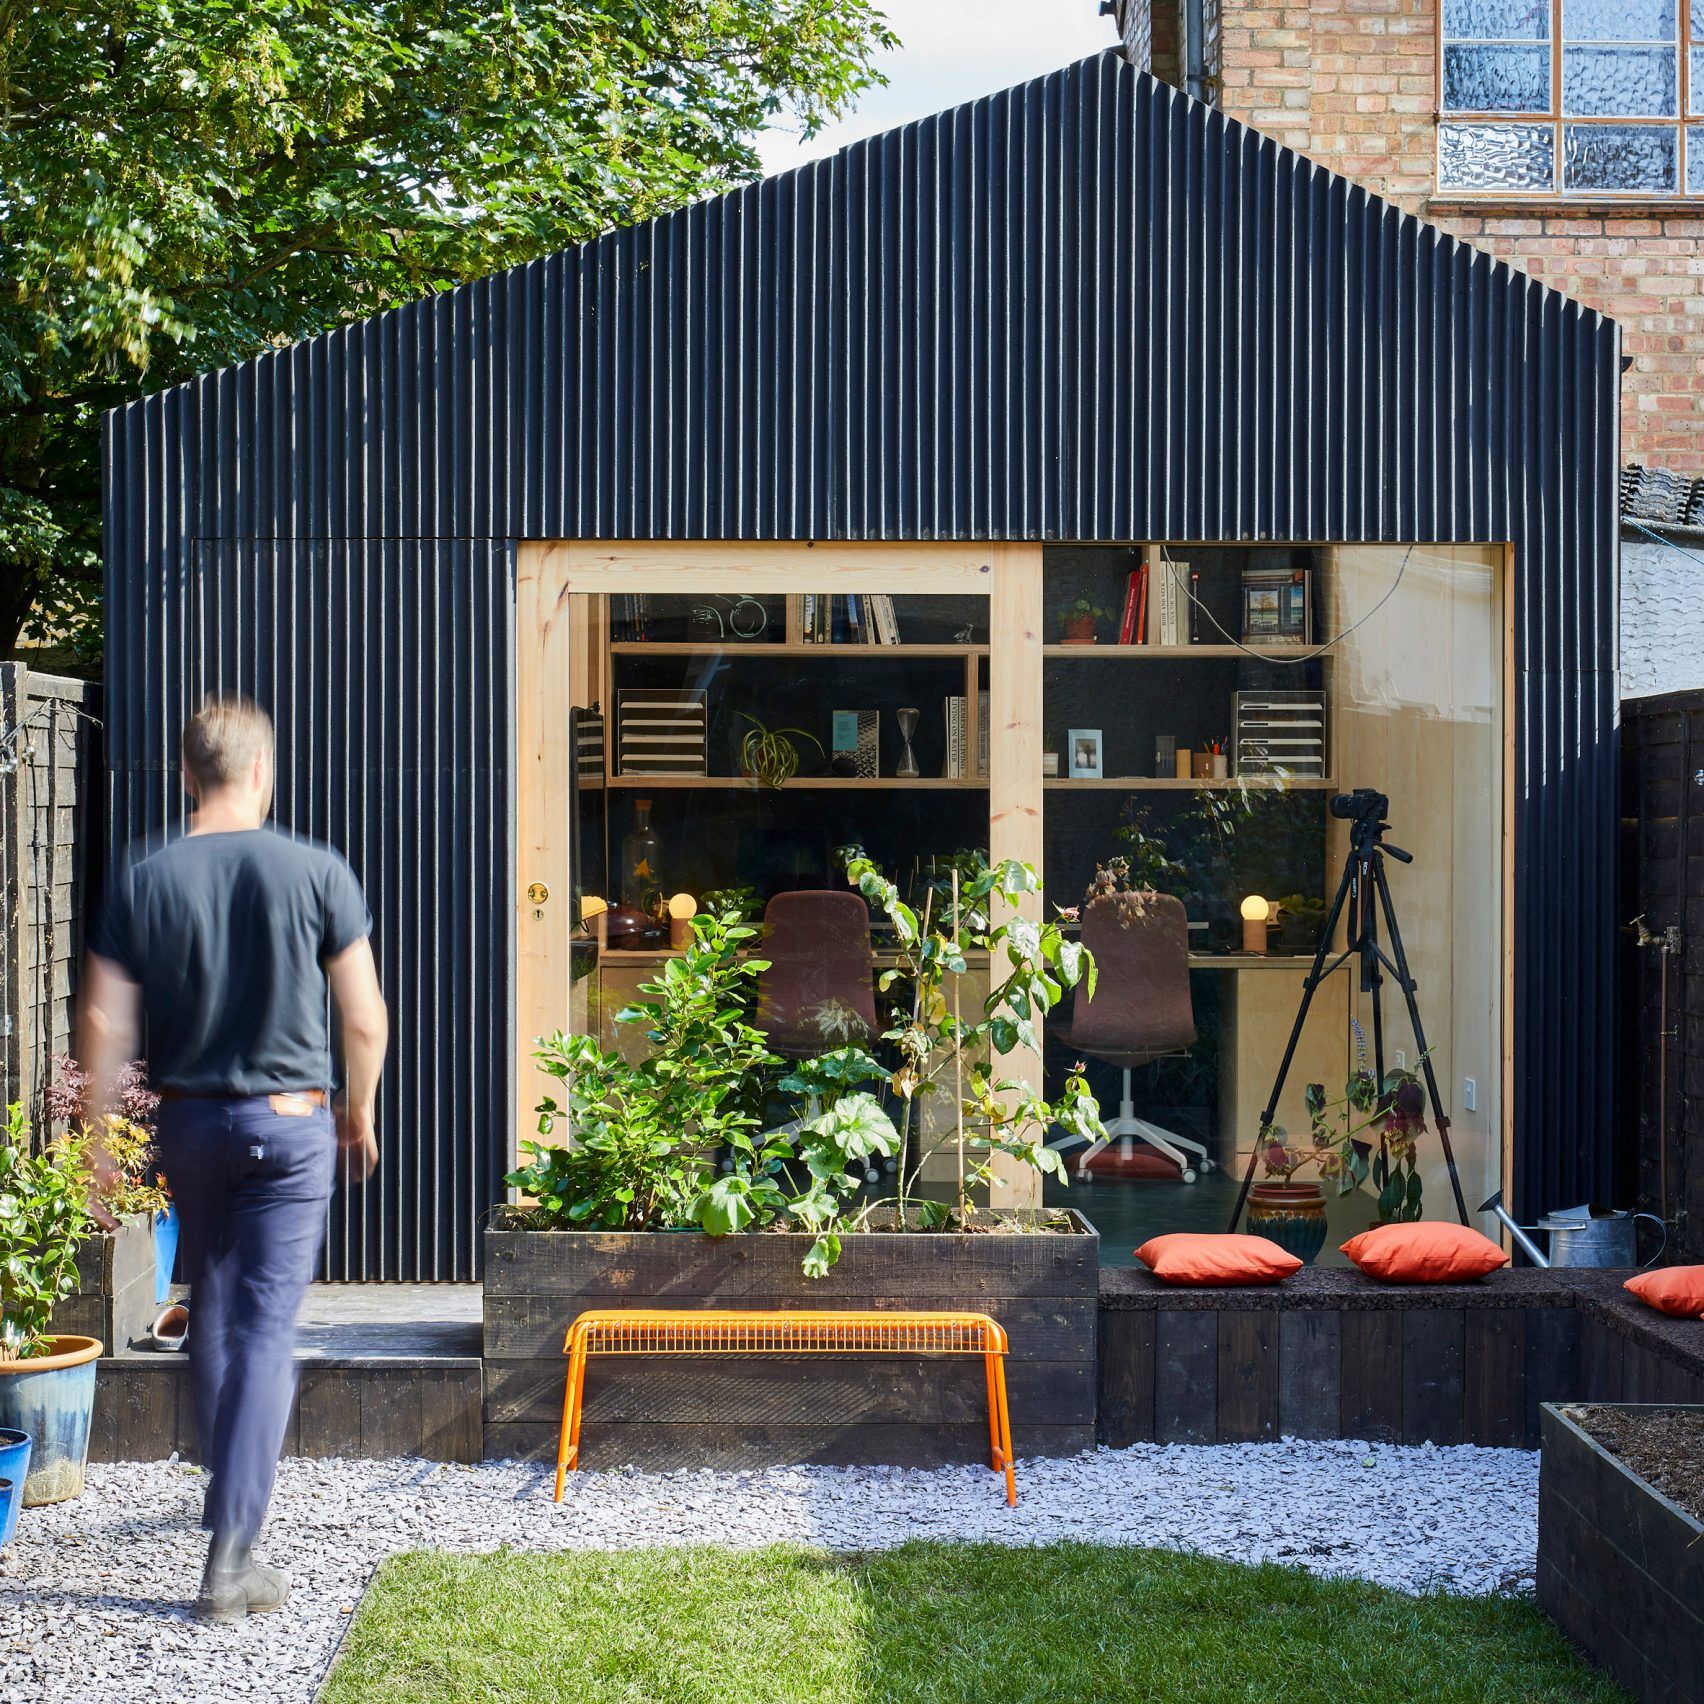 Creating a Productive Workspace: The
Benefits of Garden Offices